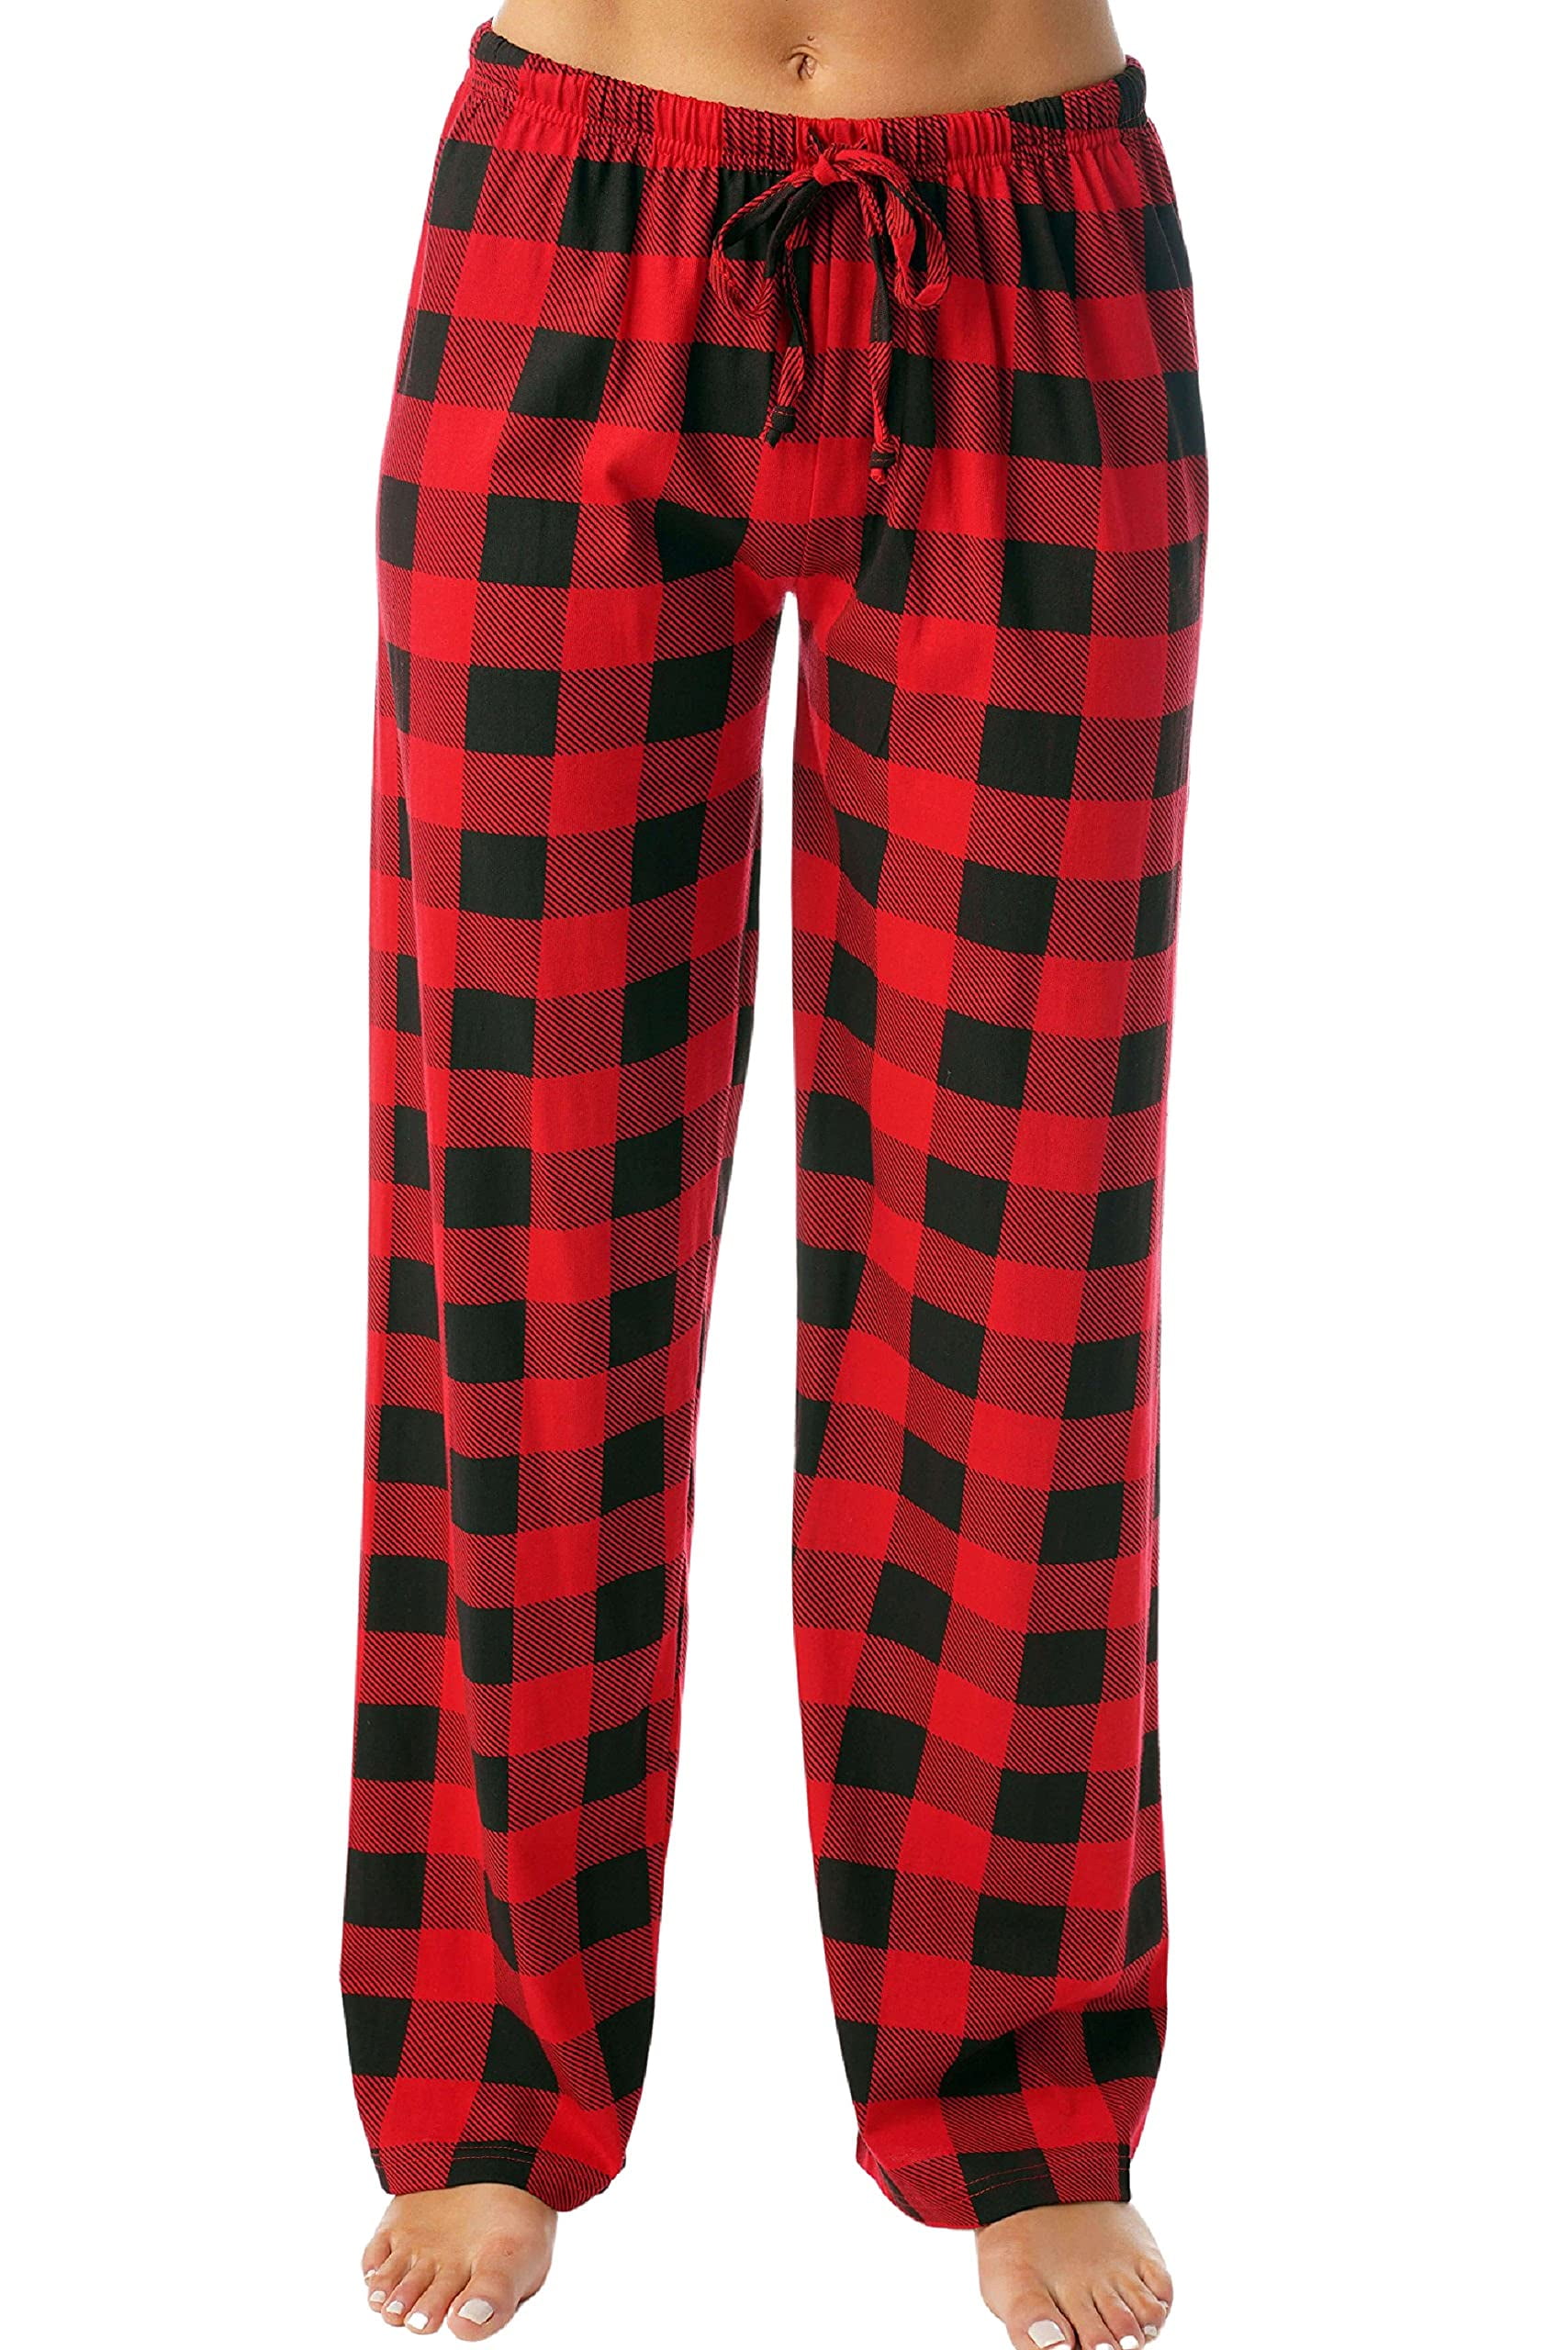 Endless Cheer Plaid Pants In Red